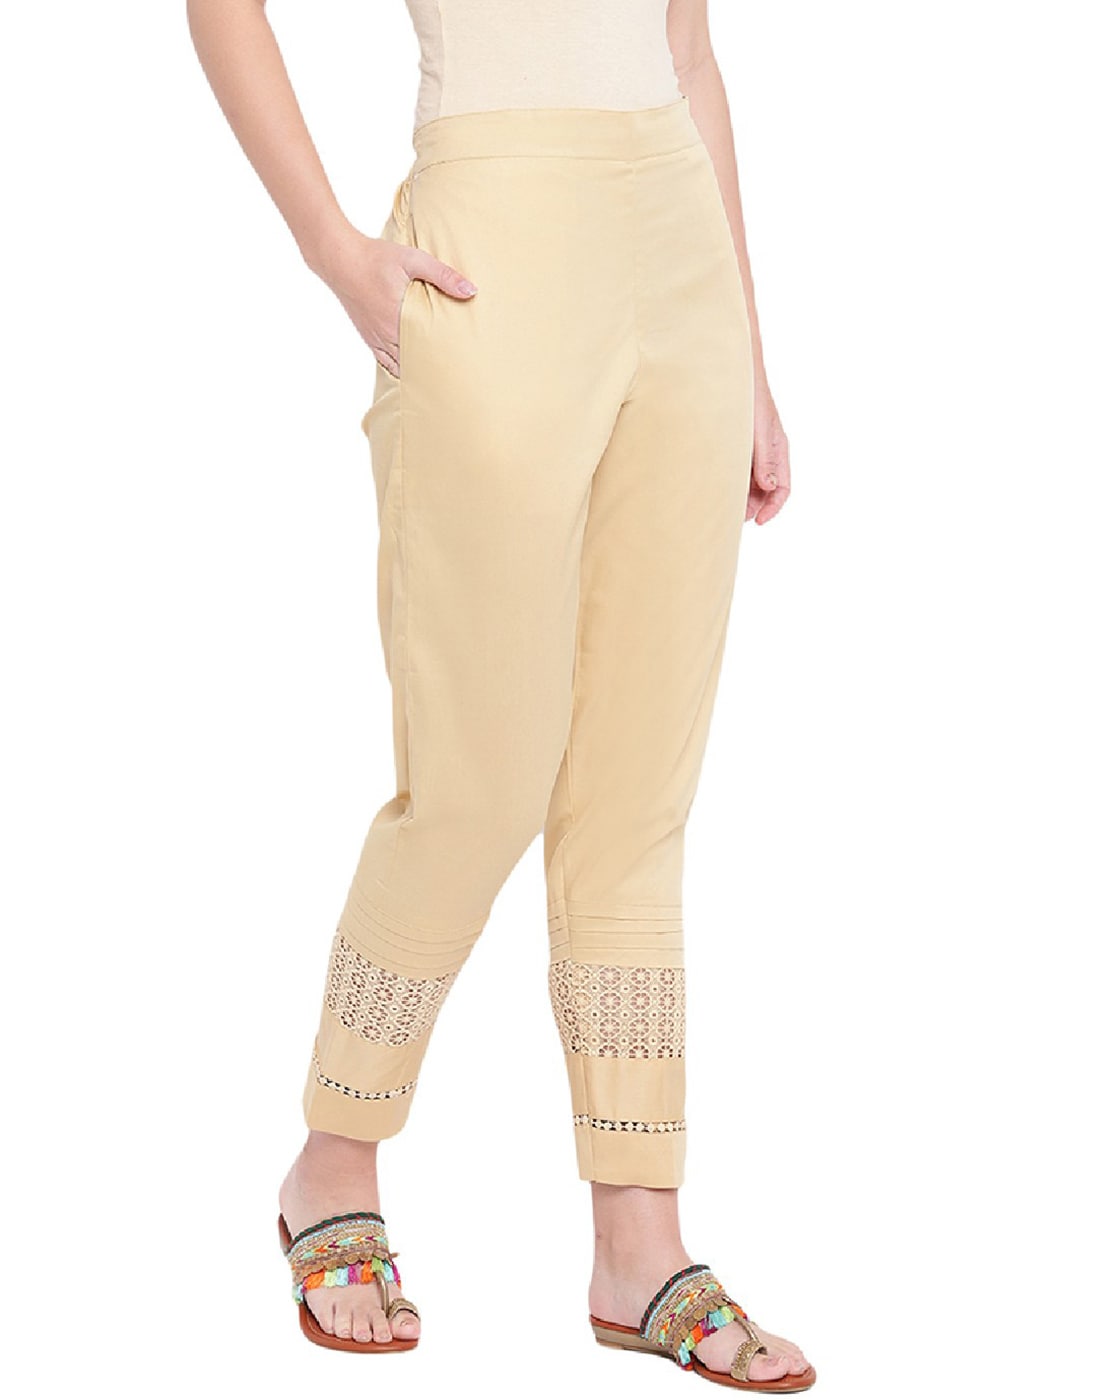 Retro Rover: Golden Girl-A Vintage Outfit Post and a Review of Piplotex's  1950s Cigarette Pants